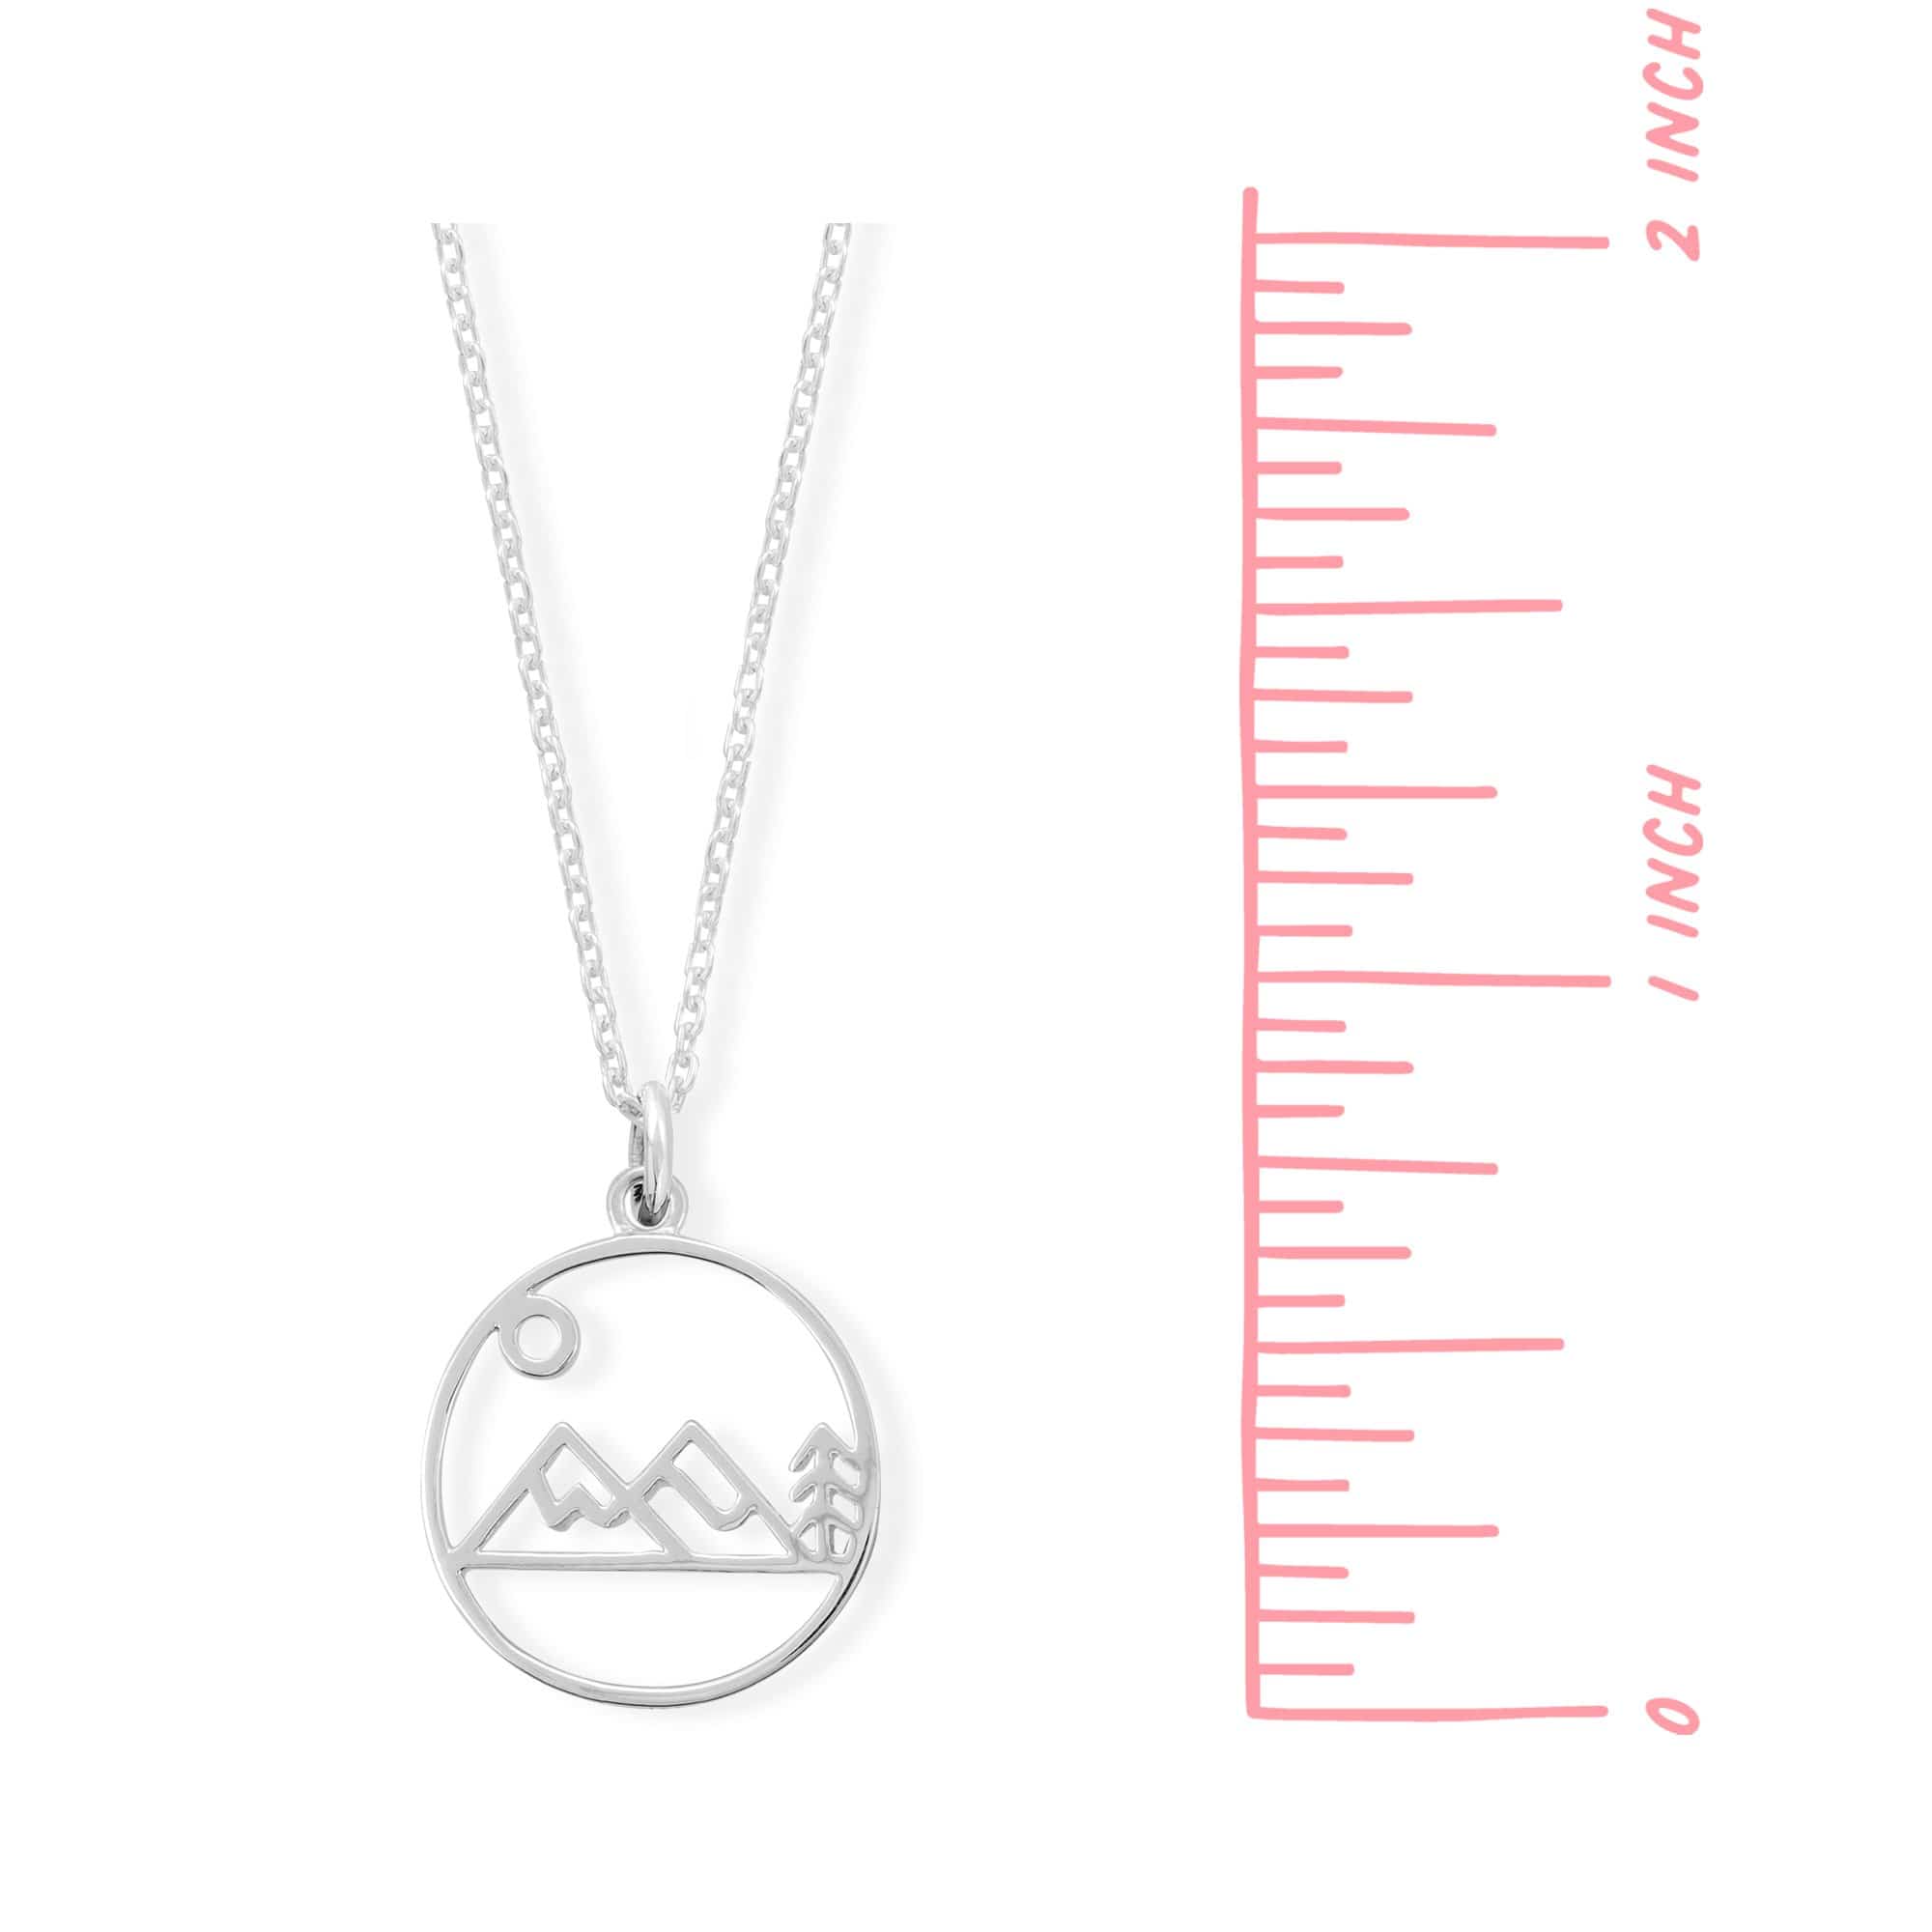 Boma Jewelry Necklaces Mountain Sunset Necklace